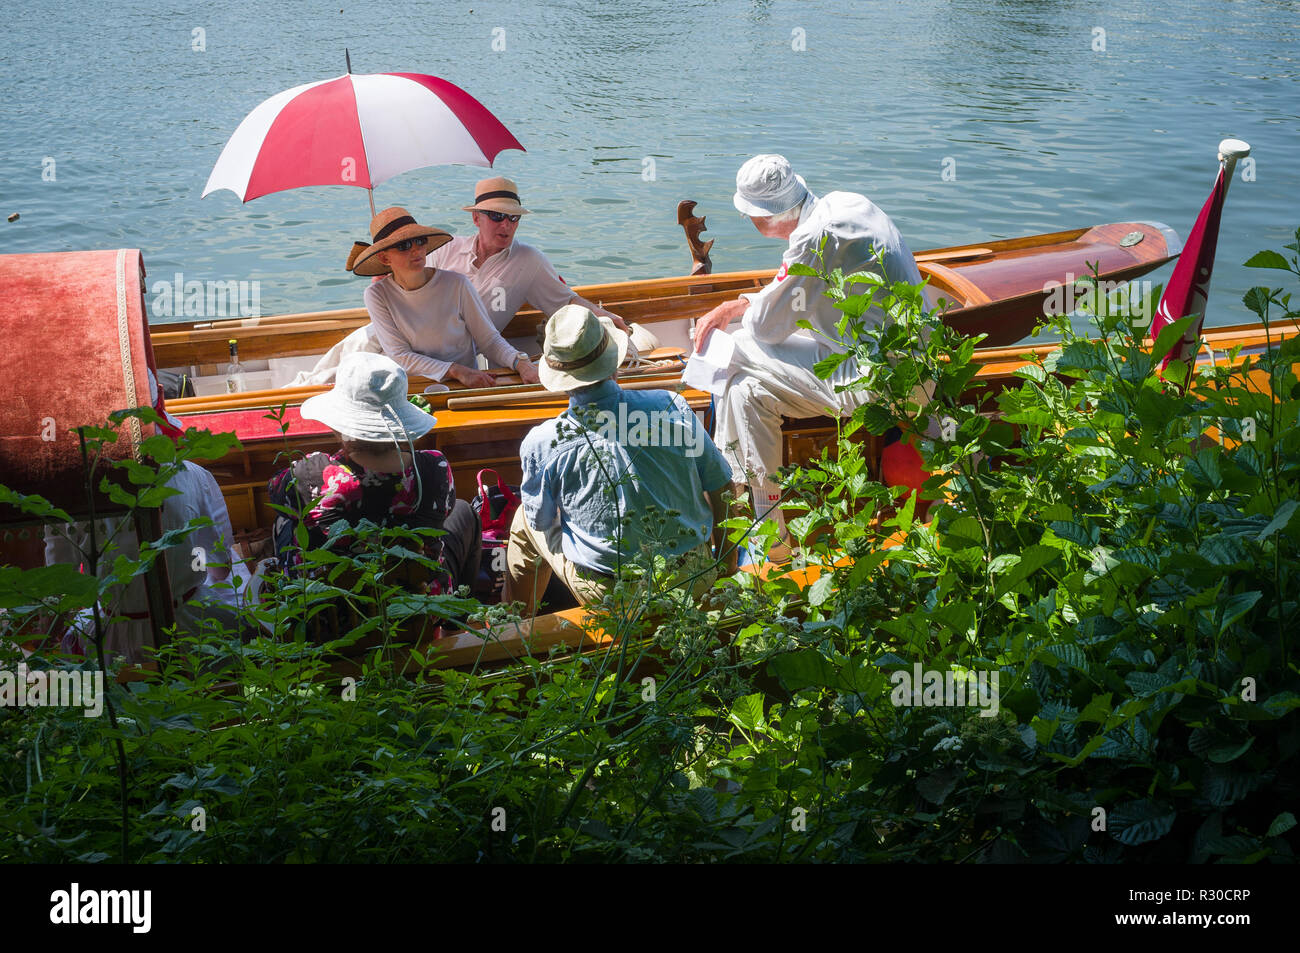 A red and white umbrella shelters a party on two classic vintage mahogany boats by the towpath at Henley Royal Regatta, Henley-on-Thames, Oxfordshire Stock Photo